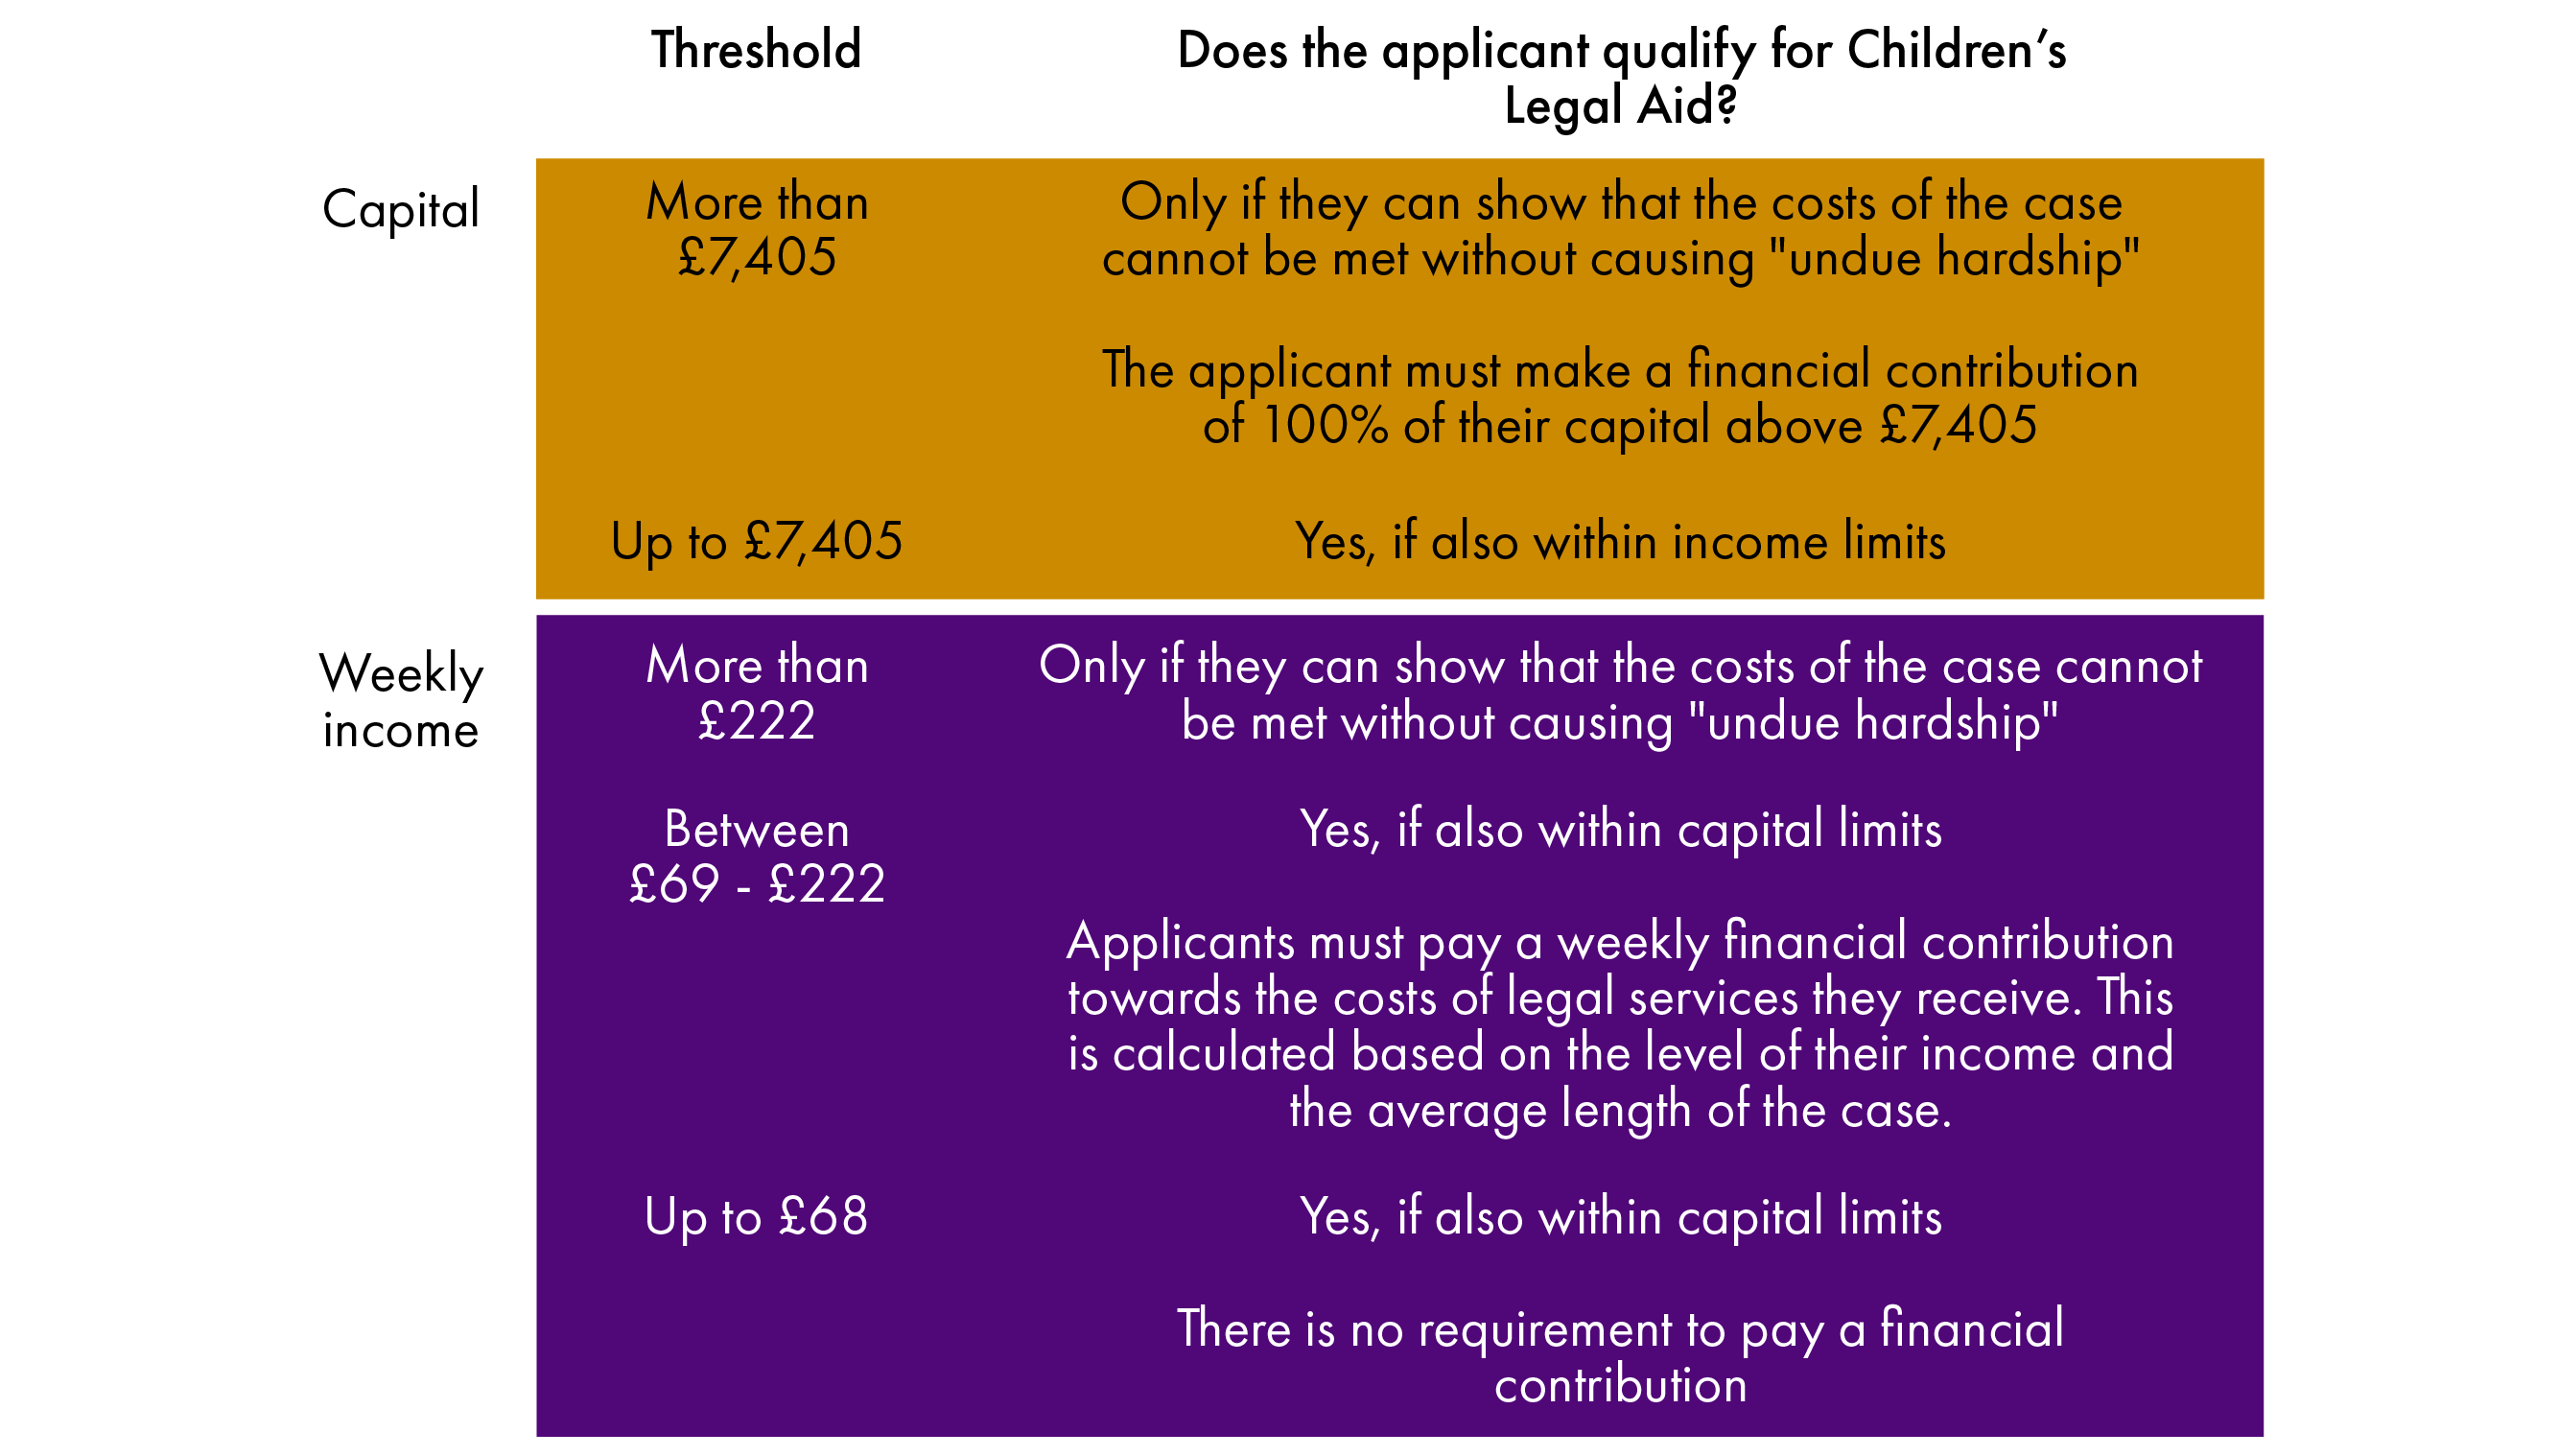 A table showing the financial thresholds used by SLAB to assess entitlement to Children's Legal Aid.